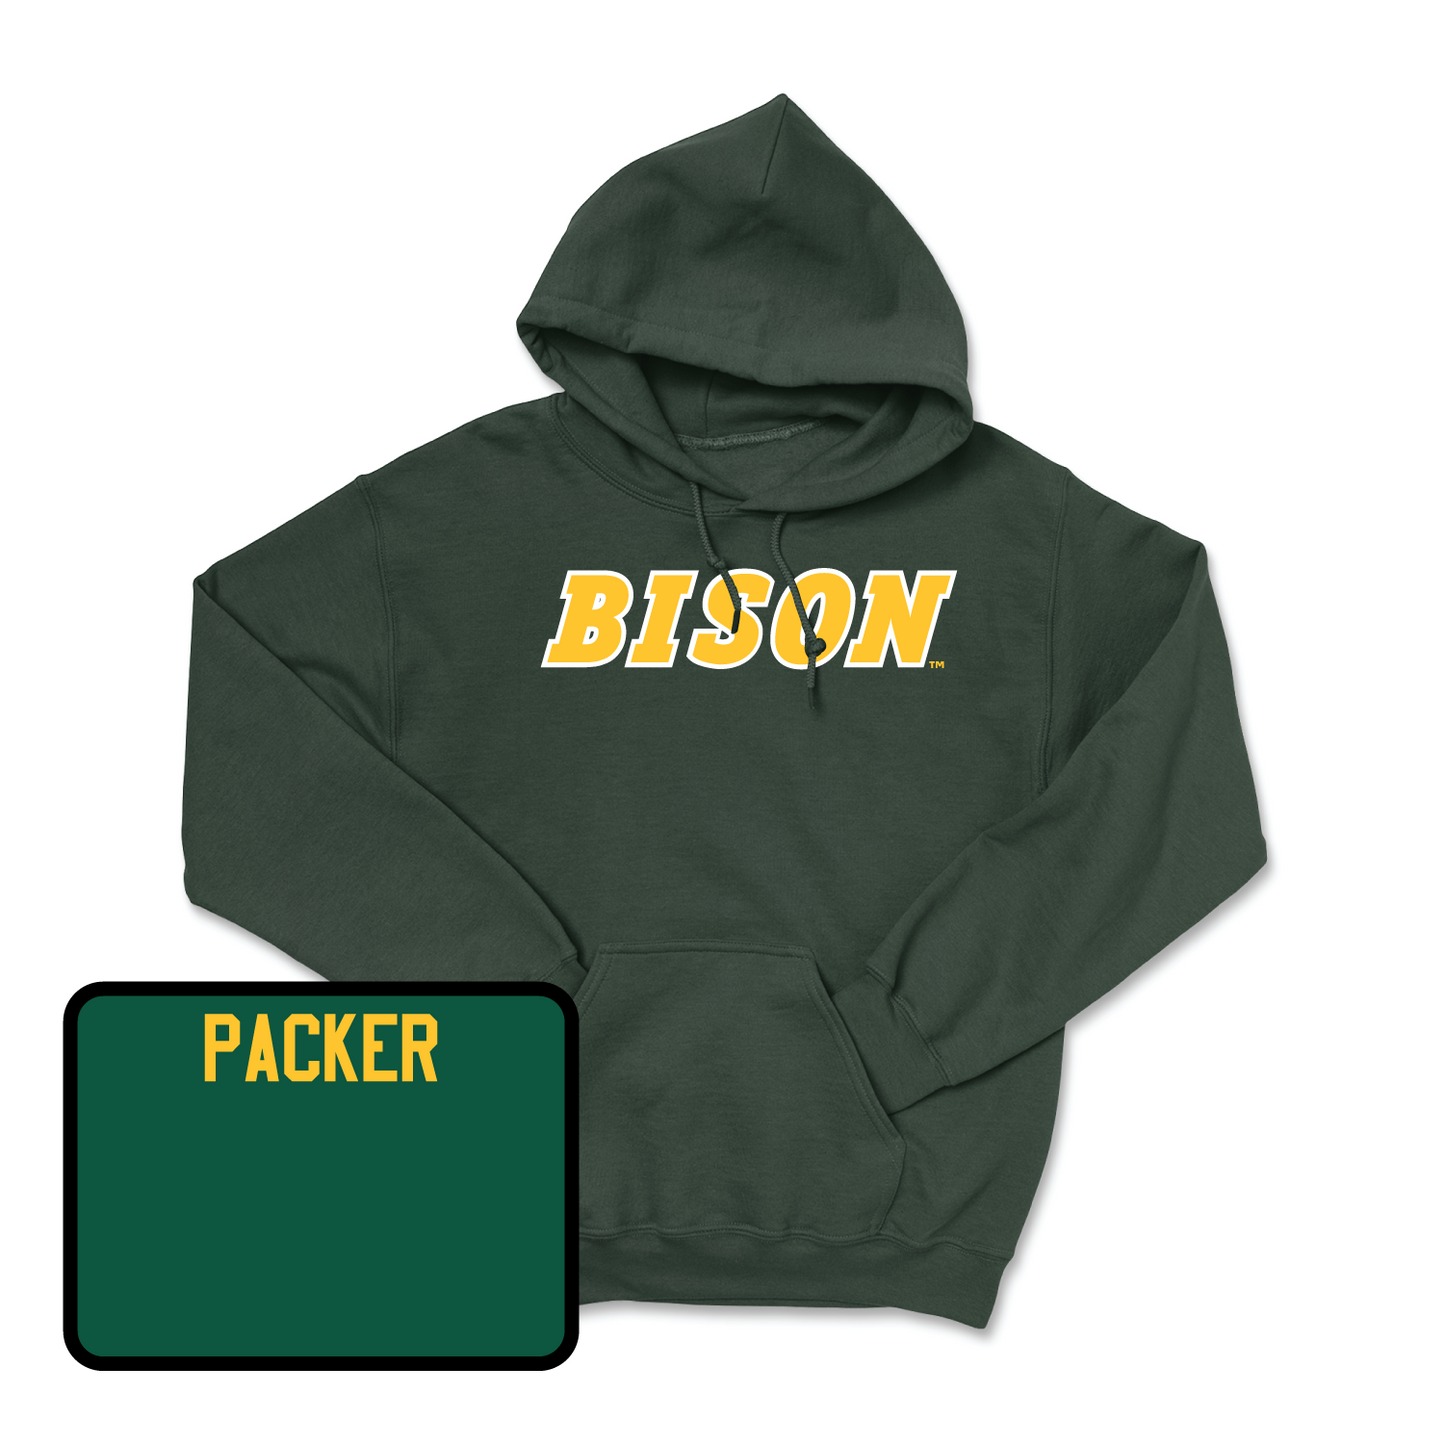 Green Track & Field Player Hoodie Small / Jack Packer